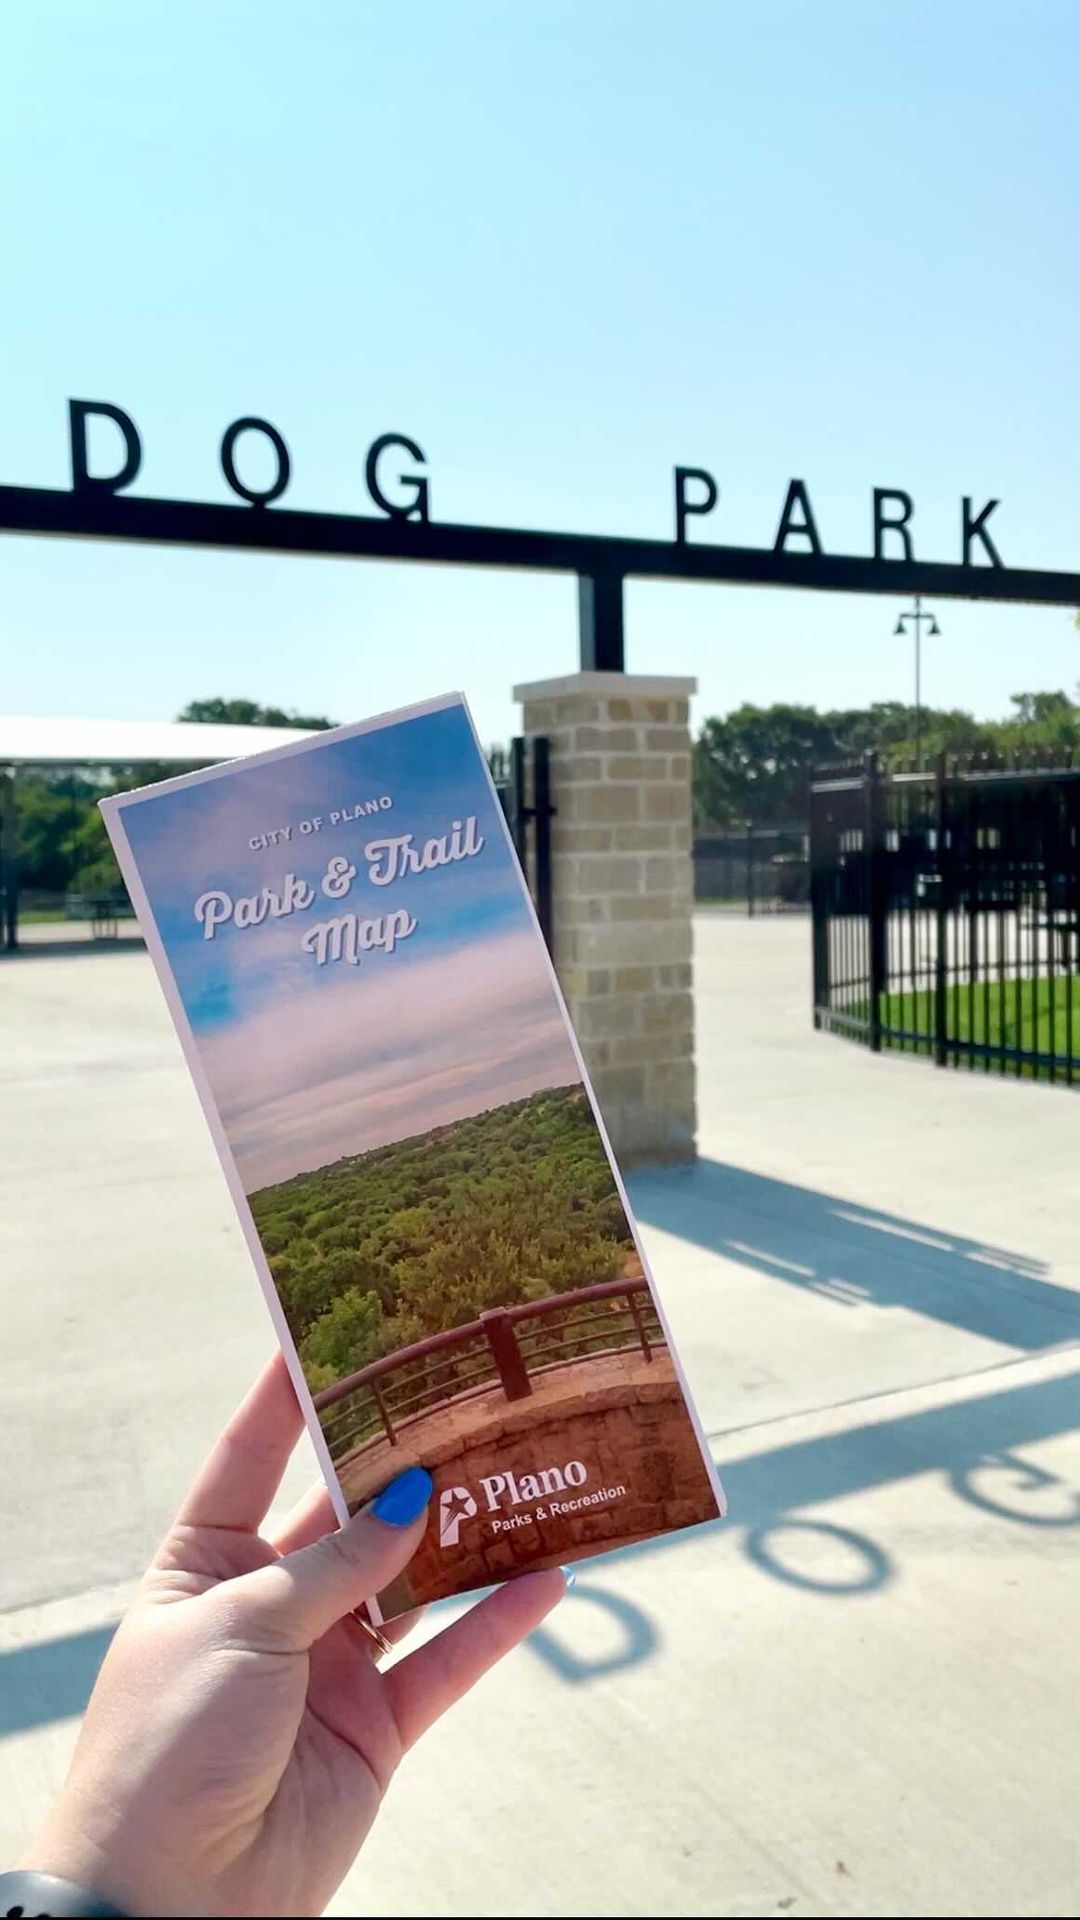 DYK Plano has three dog parks? They are the perfect place to let your <a target='_blank' href='https://www.instagram.com/explore/tags/planopup/'>#planopup</a> run around and play!

🐶Bob Woodruff Park
🐾Jack Carter Park
🐕Windhaven Meadows Park

What is your pup’s favorite dog park in Plano? <a target='_blank' href='https://www.instagram.com/explore/tags/loveplano/'>#loveplano</a>